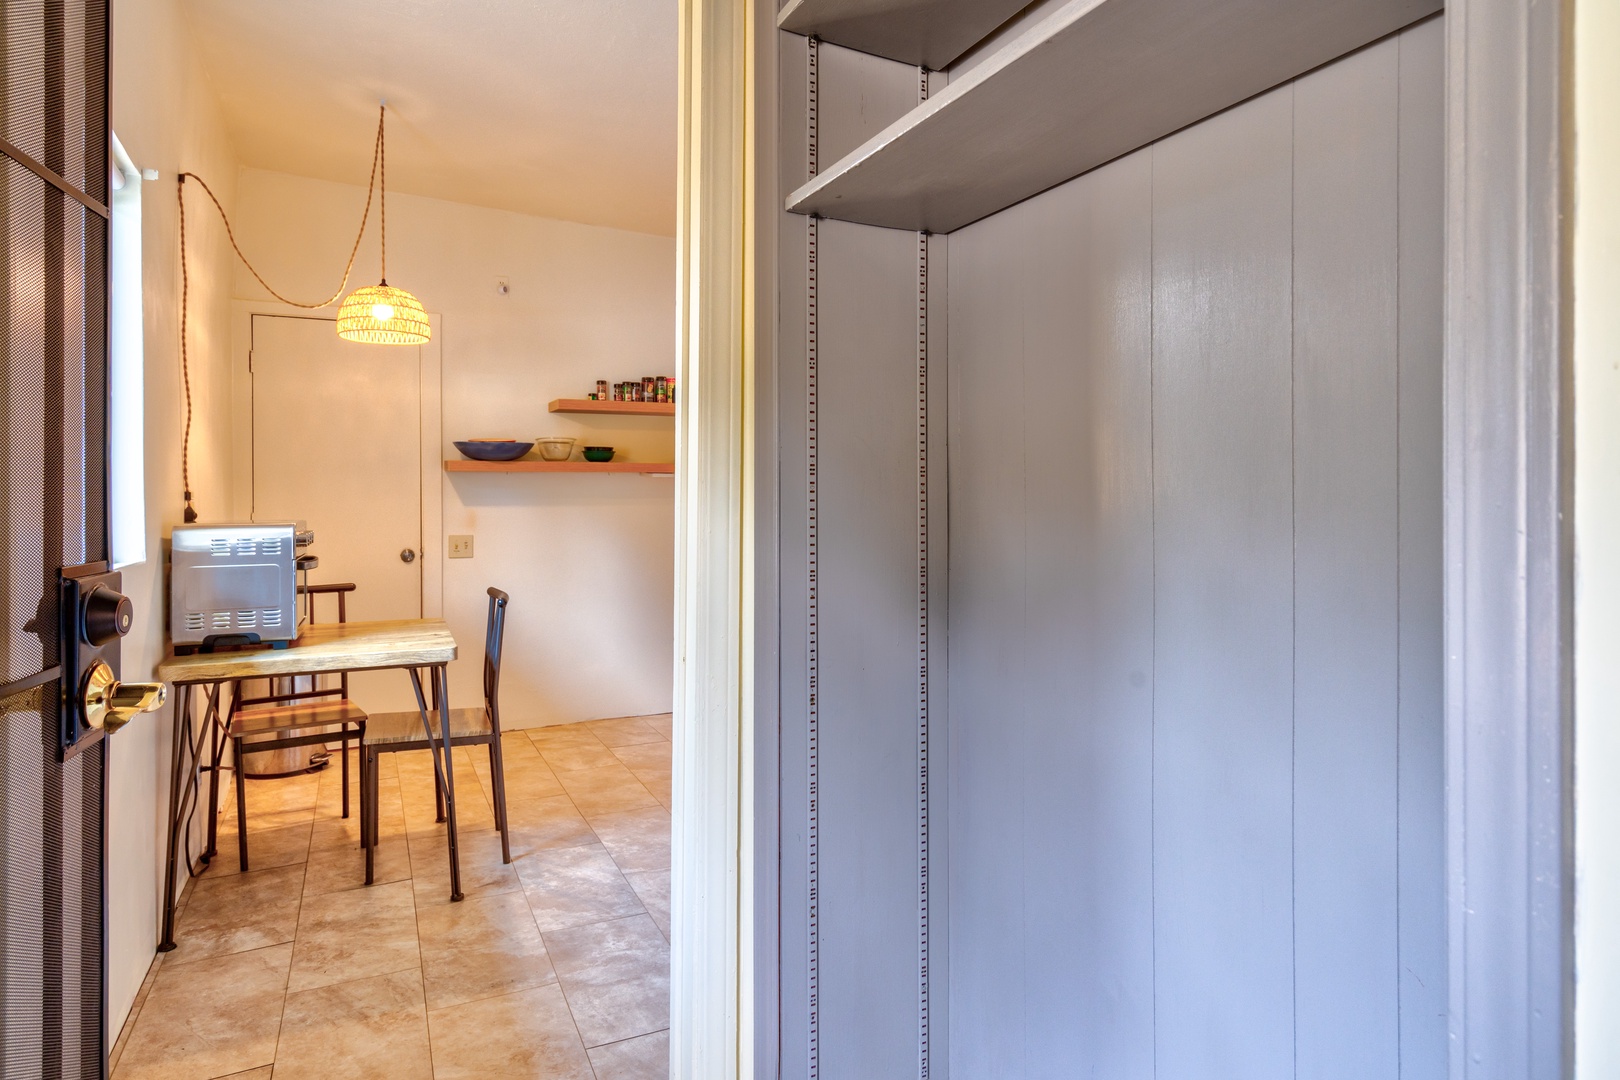 The open storage space off the kitchen is ideal for storing bags